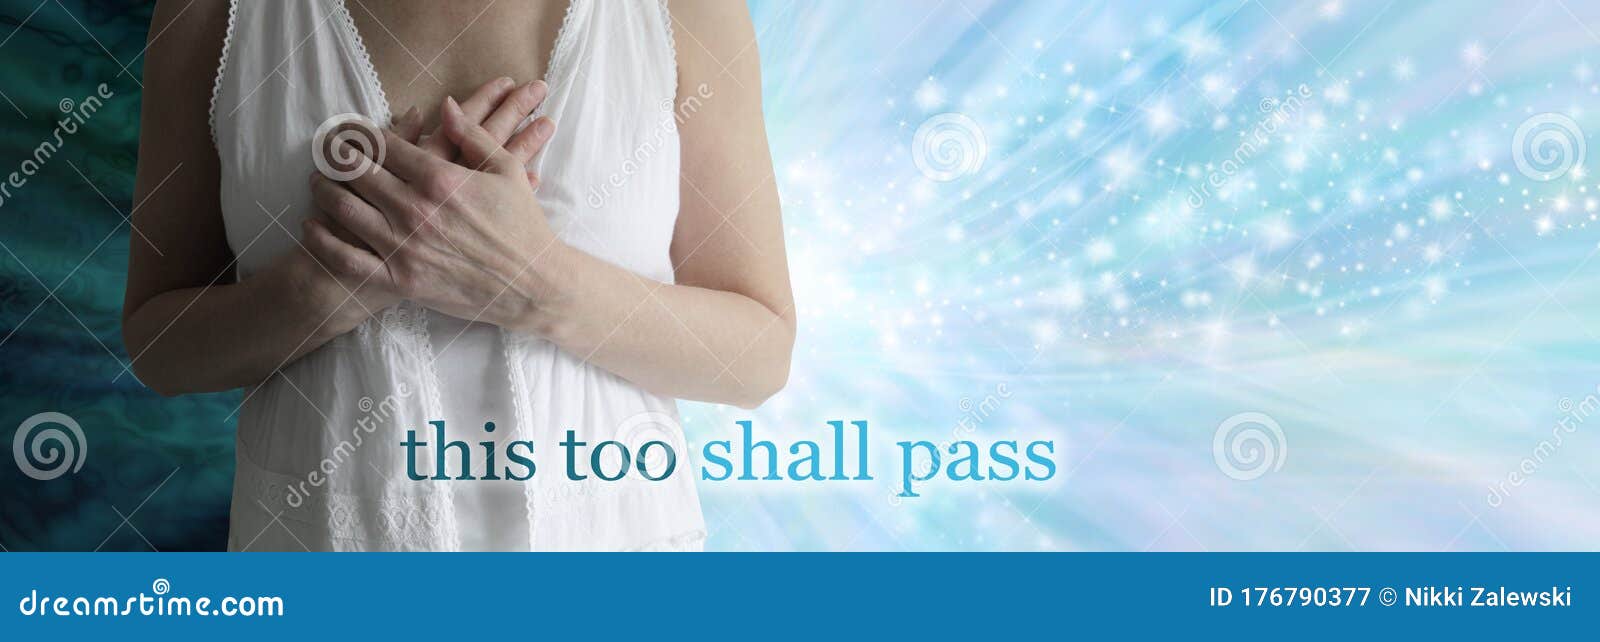 and this, too, shall pass concept banner